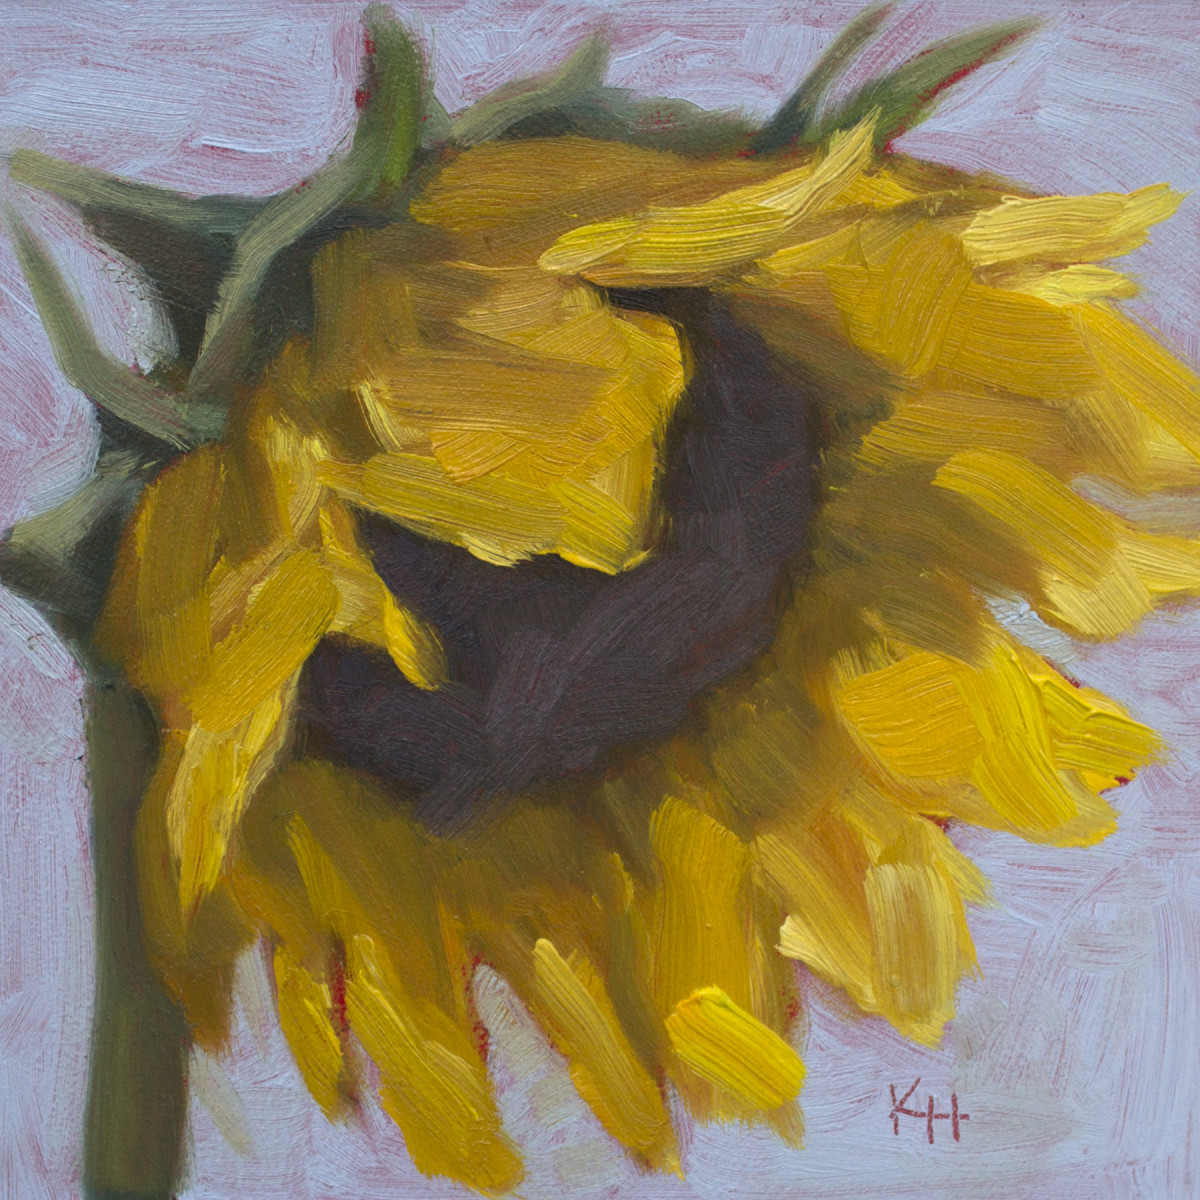 Sunflower #4 by Krista Hasson 